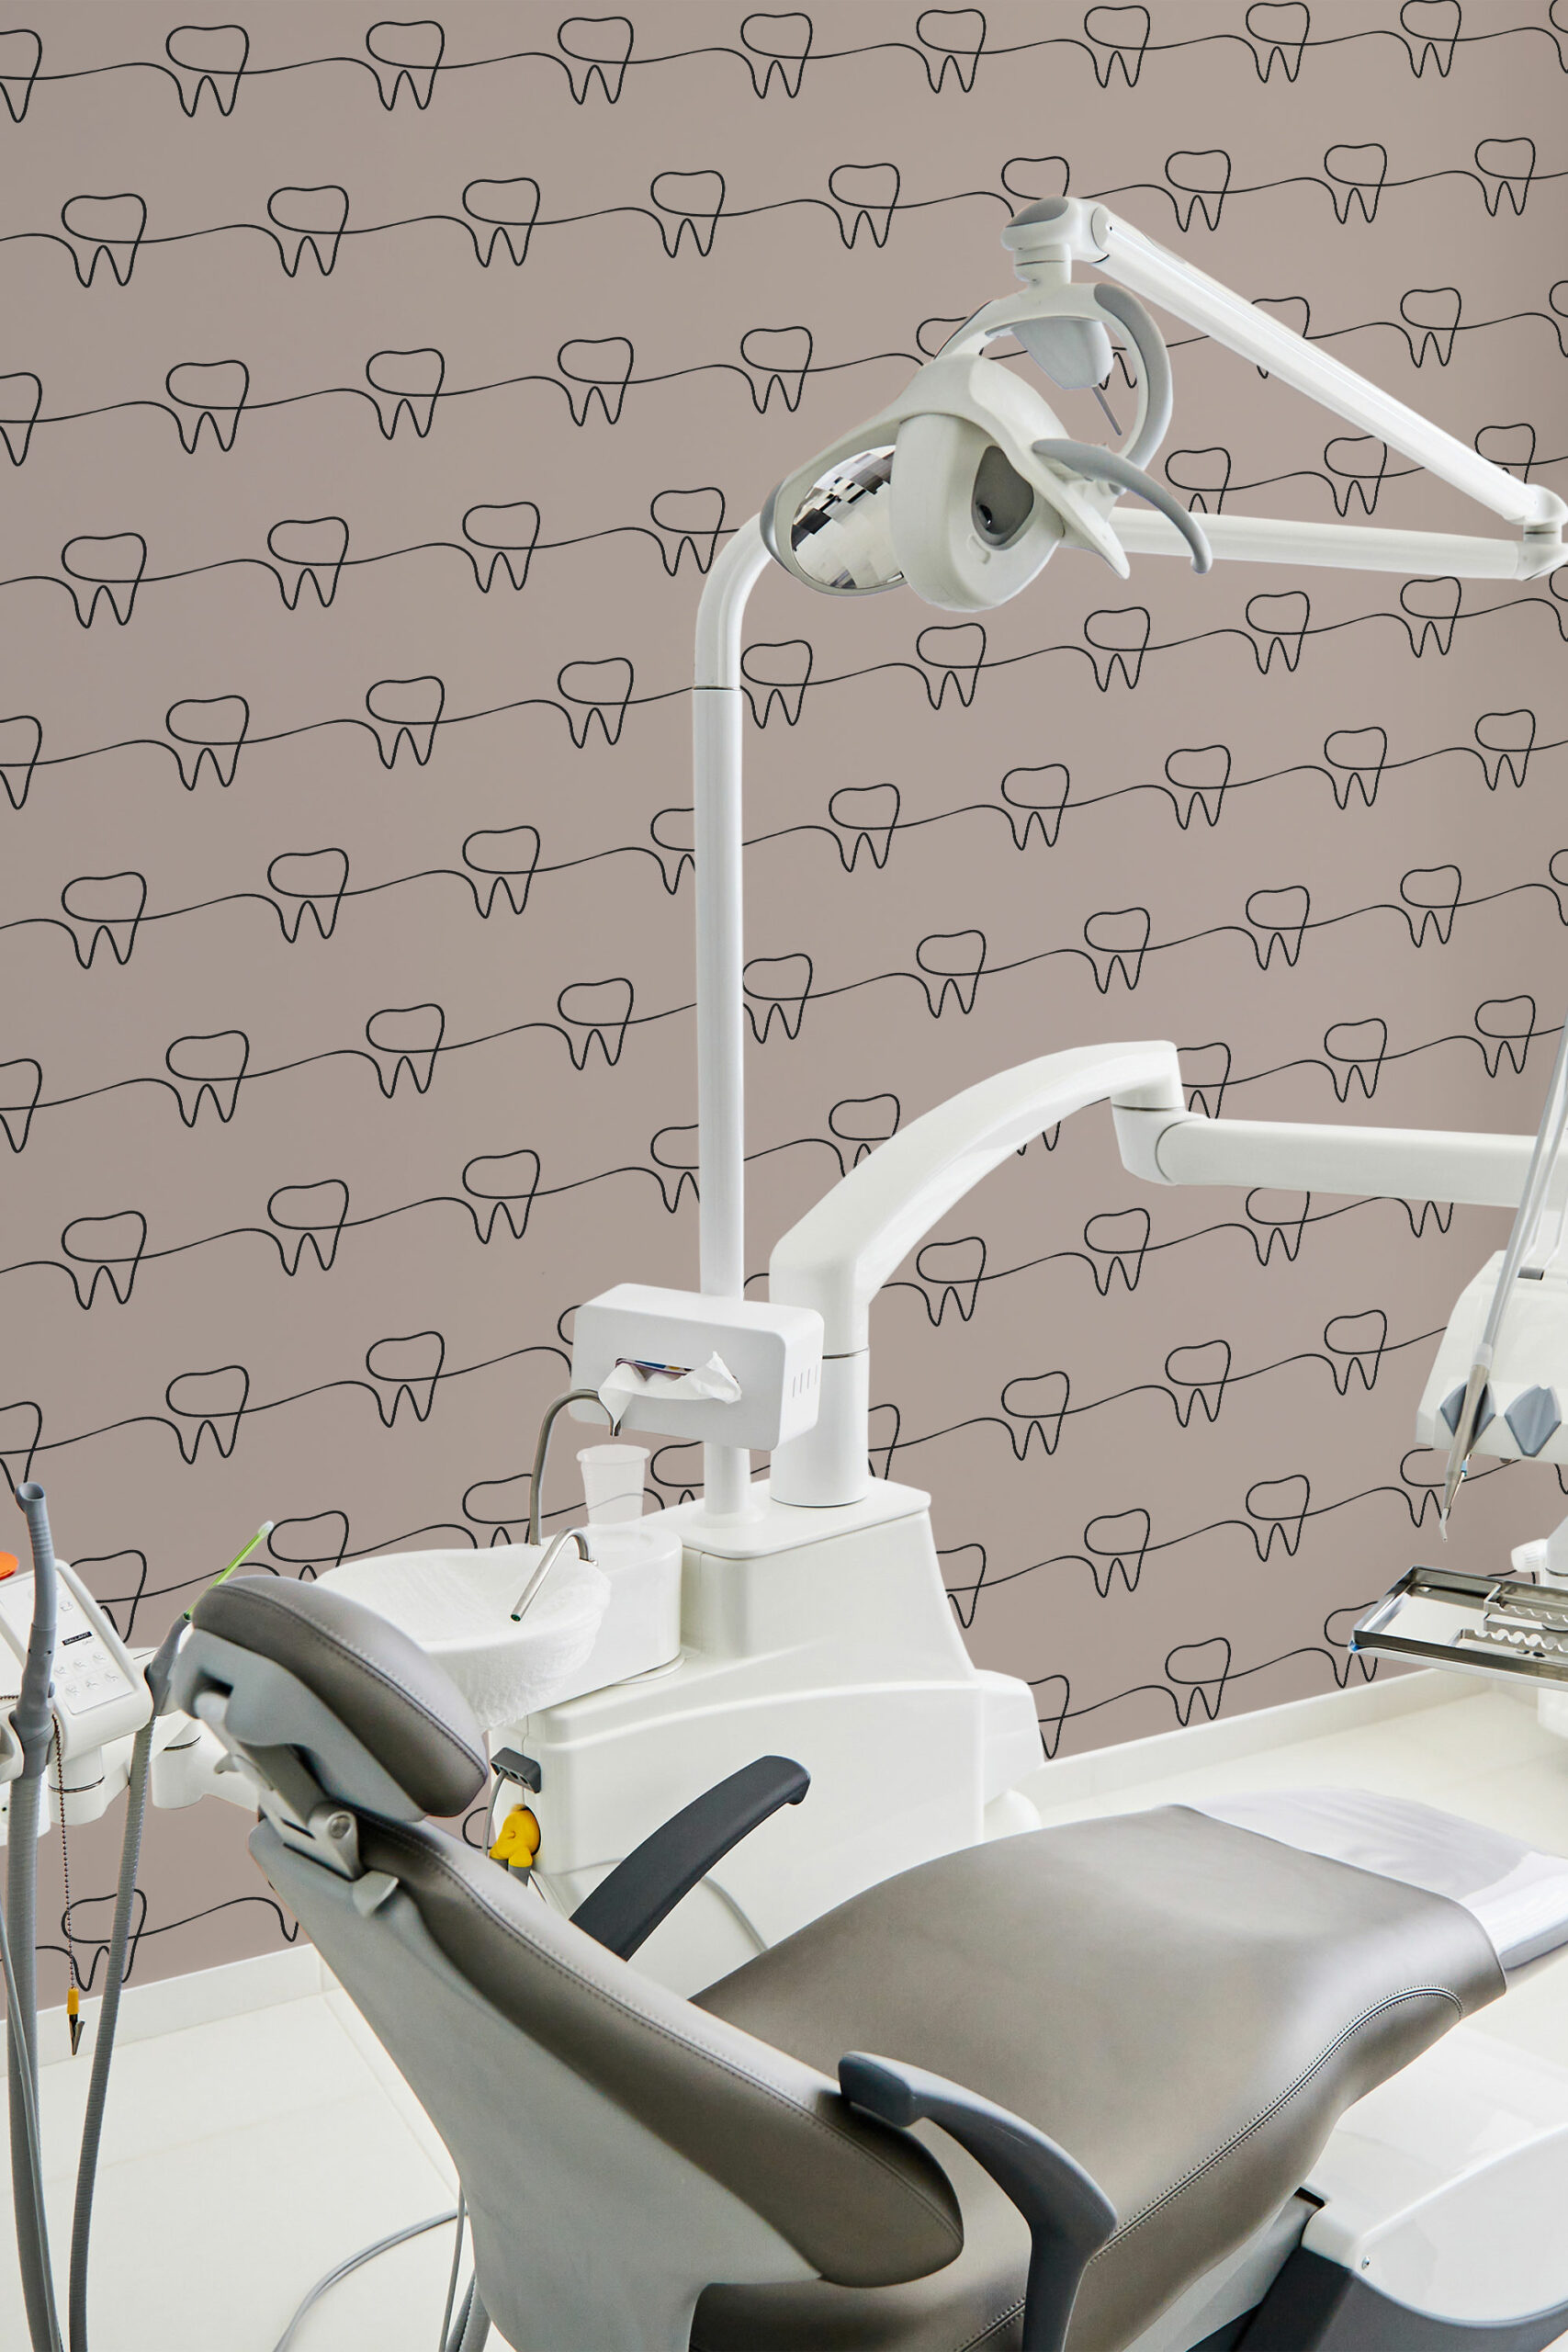 Dental peel and stick wallpaper for walls